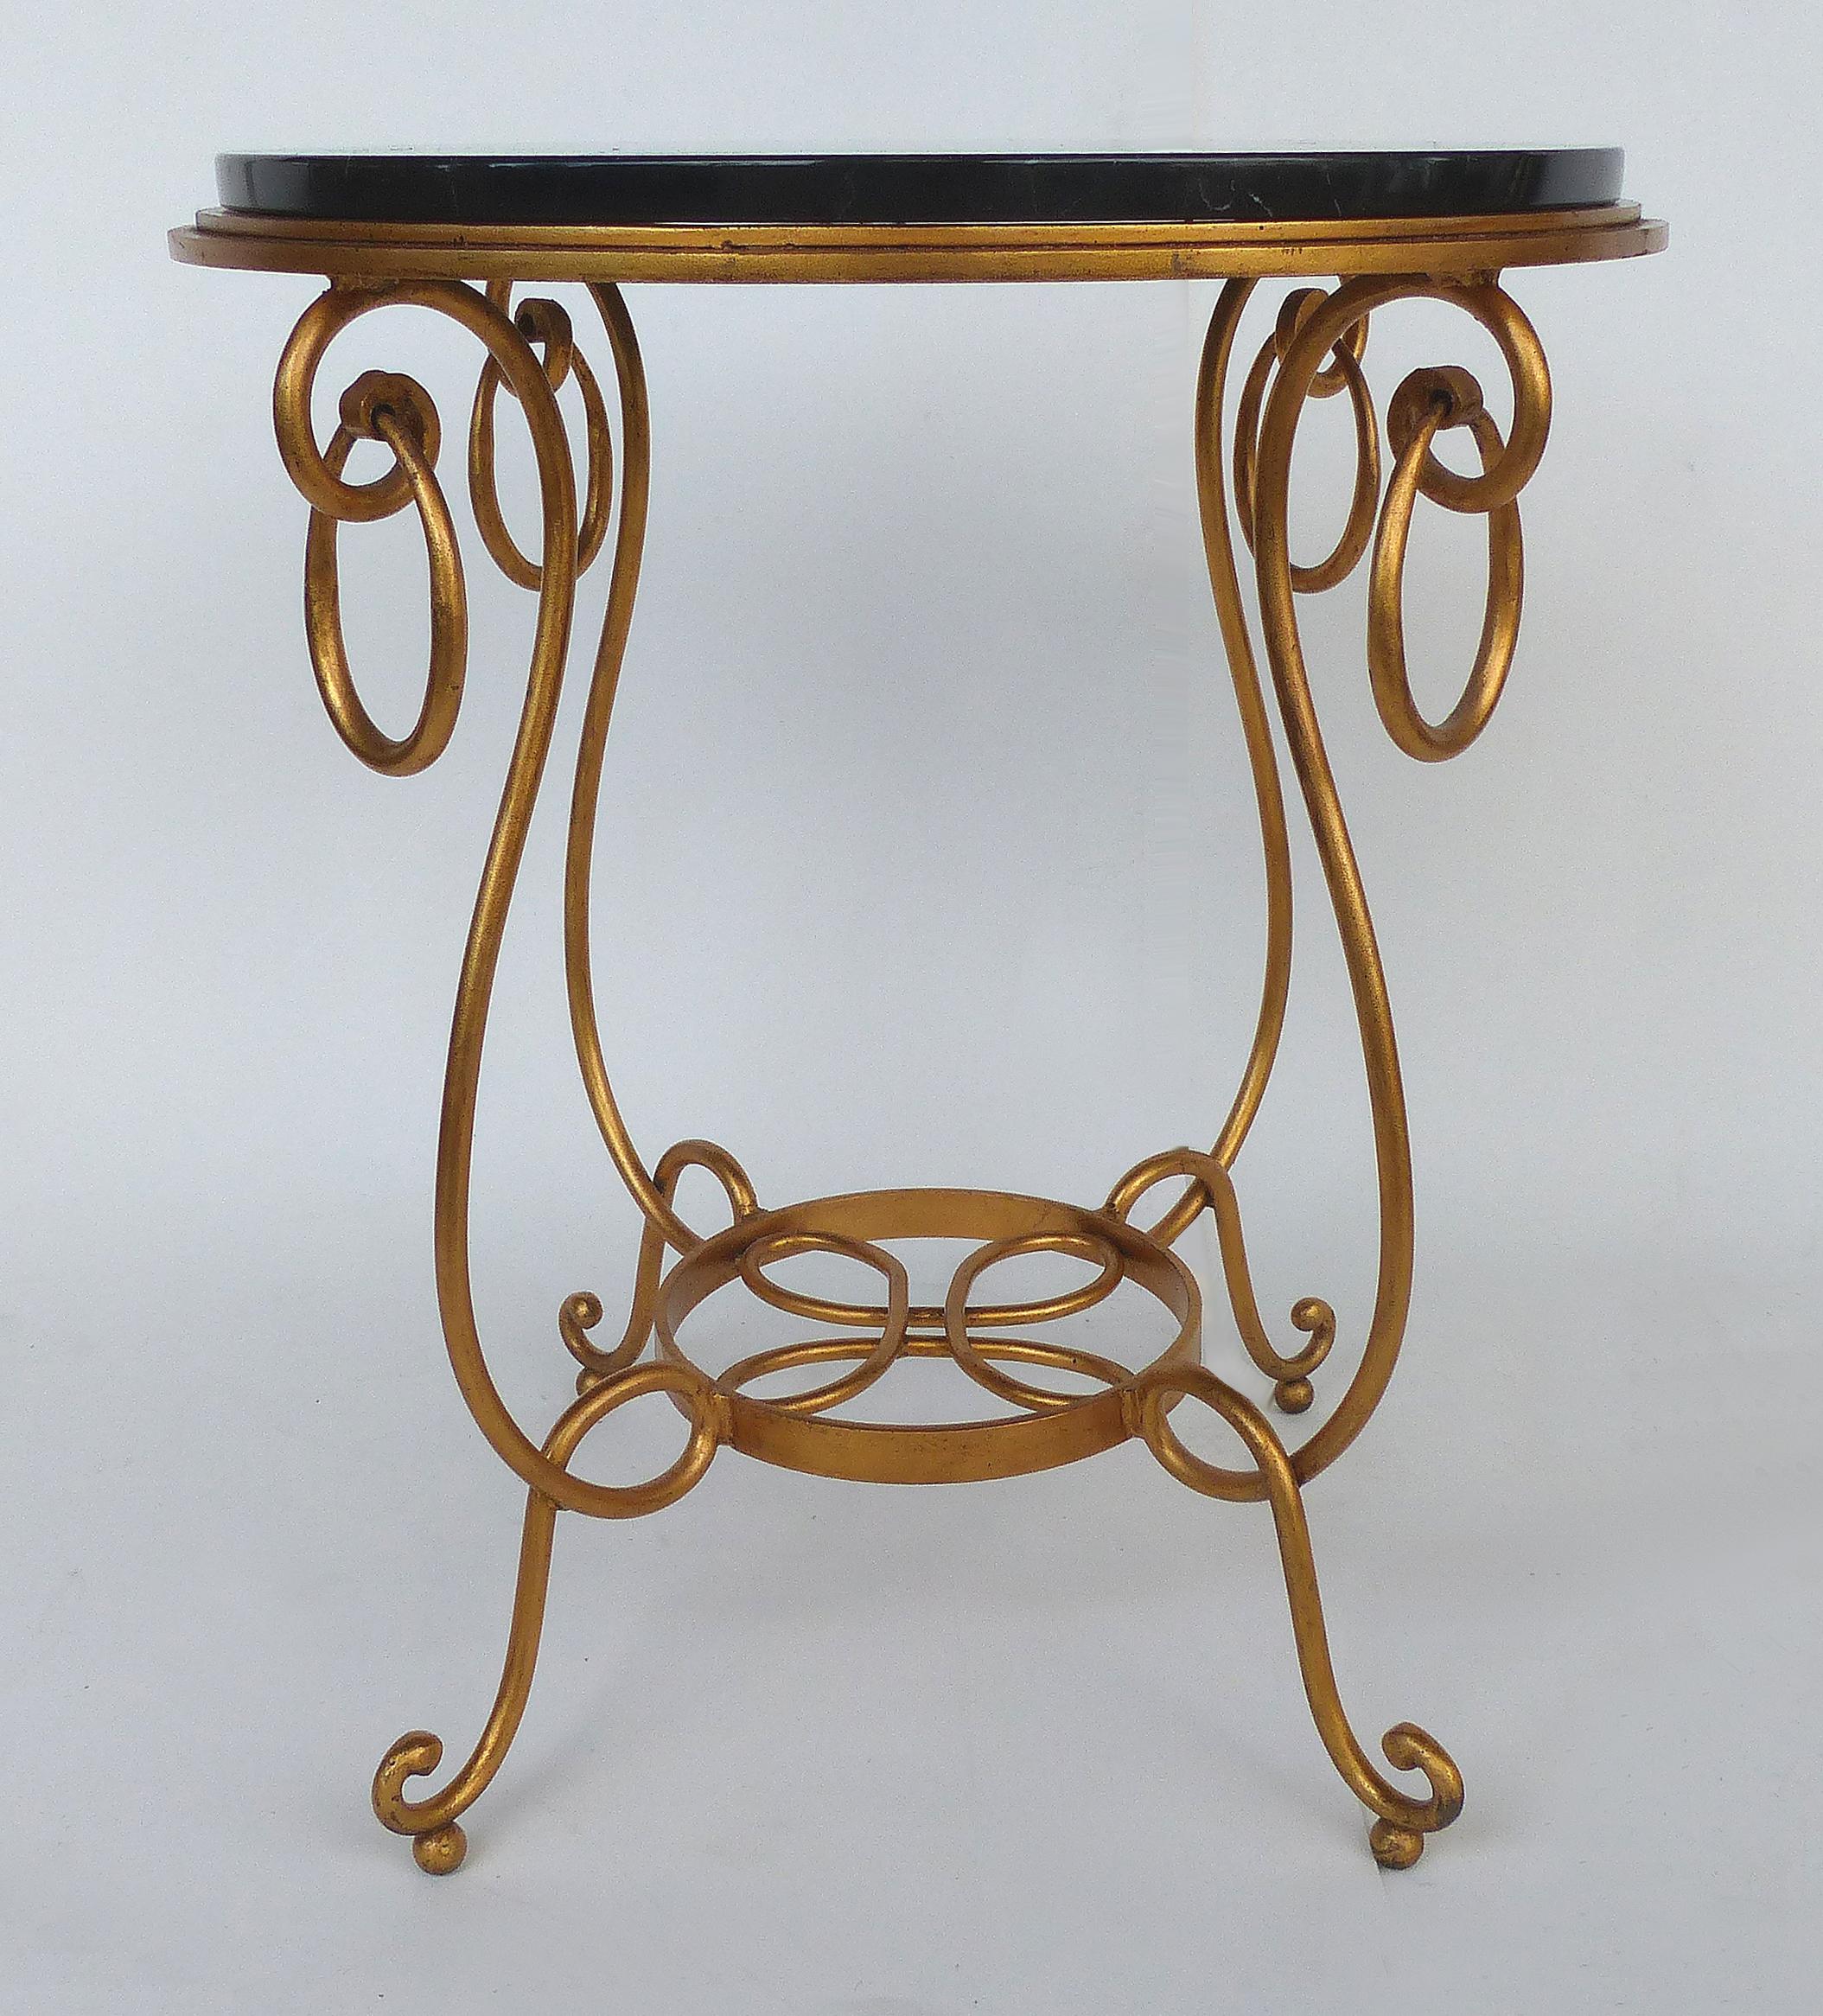 Gilt Iron and Marble Occasional Table

Offered for sale is a gilt wrought iron occasional table fitted with a thick round black marble top. The table has a delicate feel with lovely curves even though the materials are substantial.